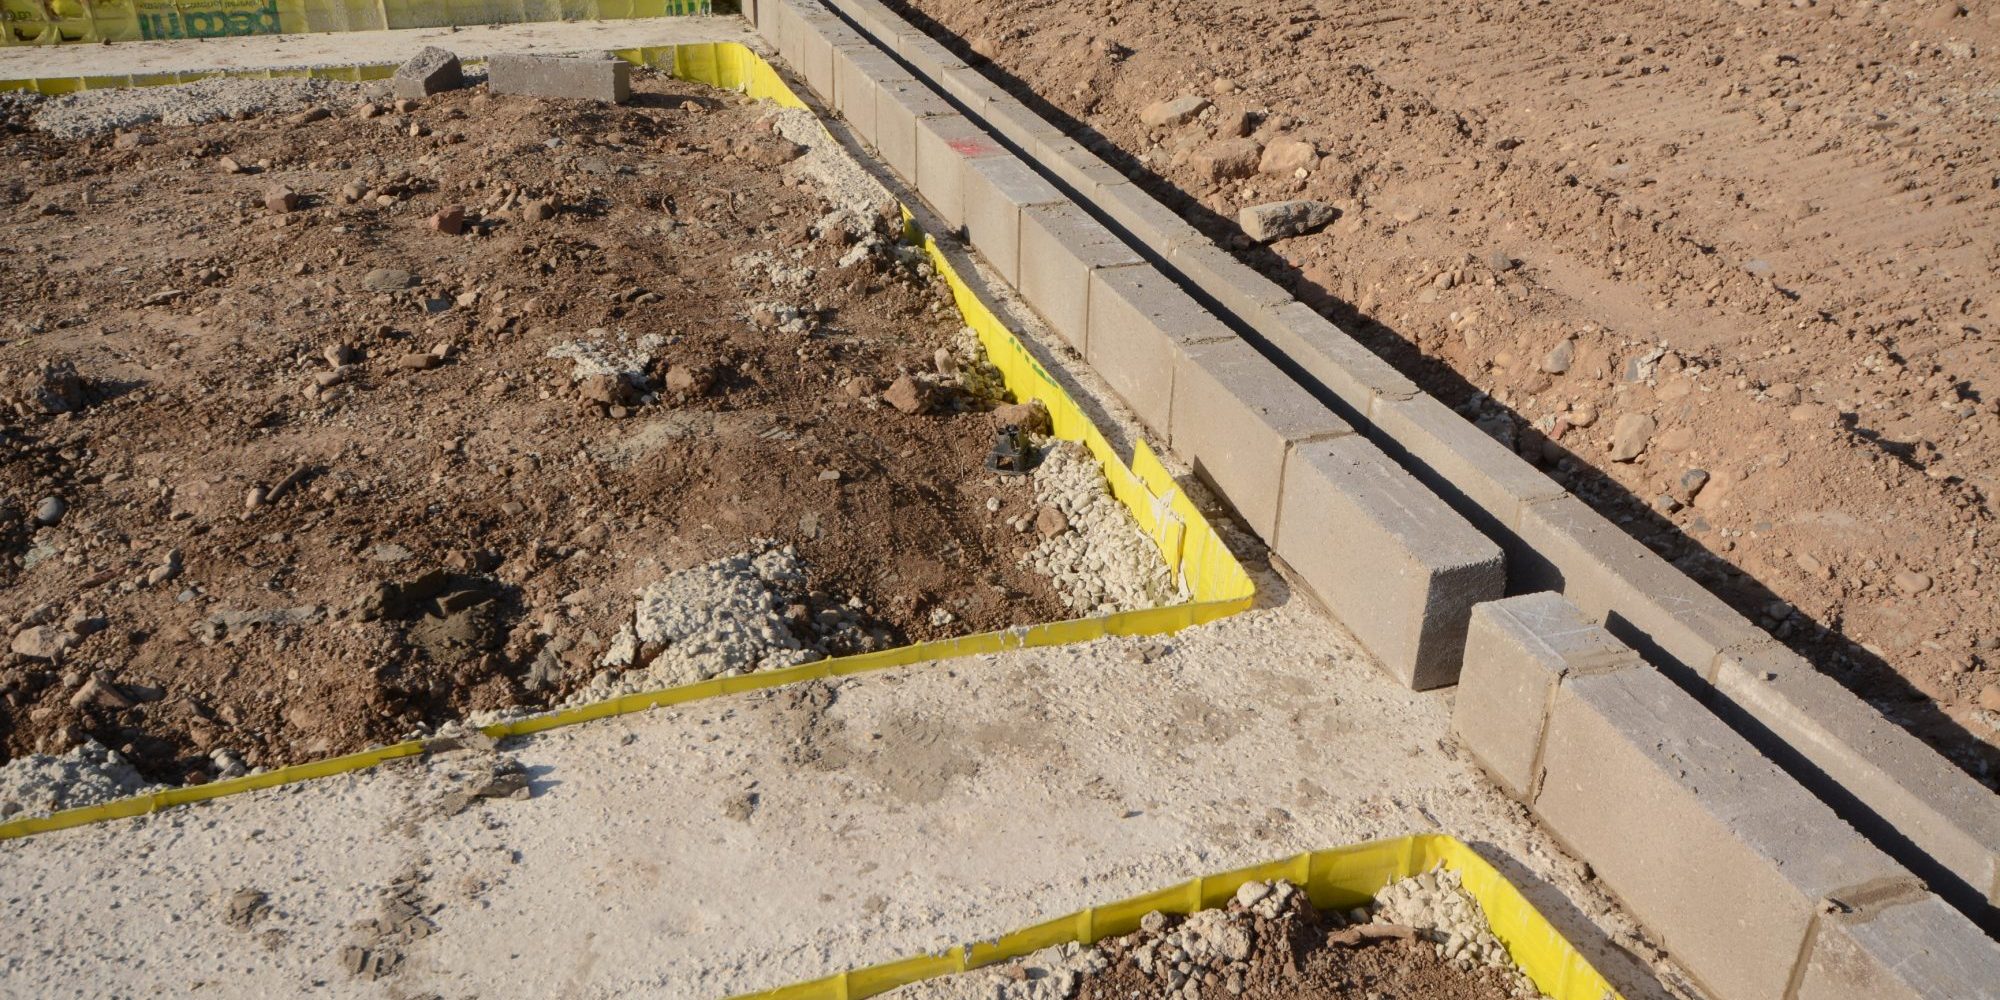 Groundwork and steel re-inforcement for concrete base on building construction site where new homes are being built showing construction methods.